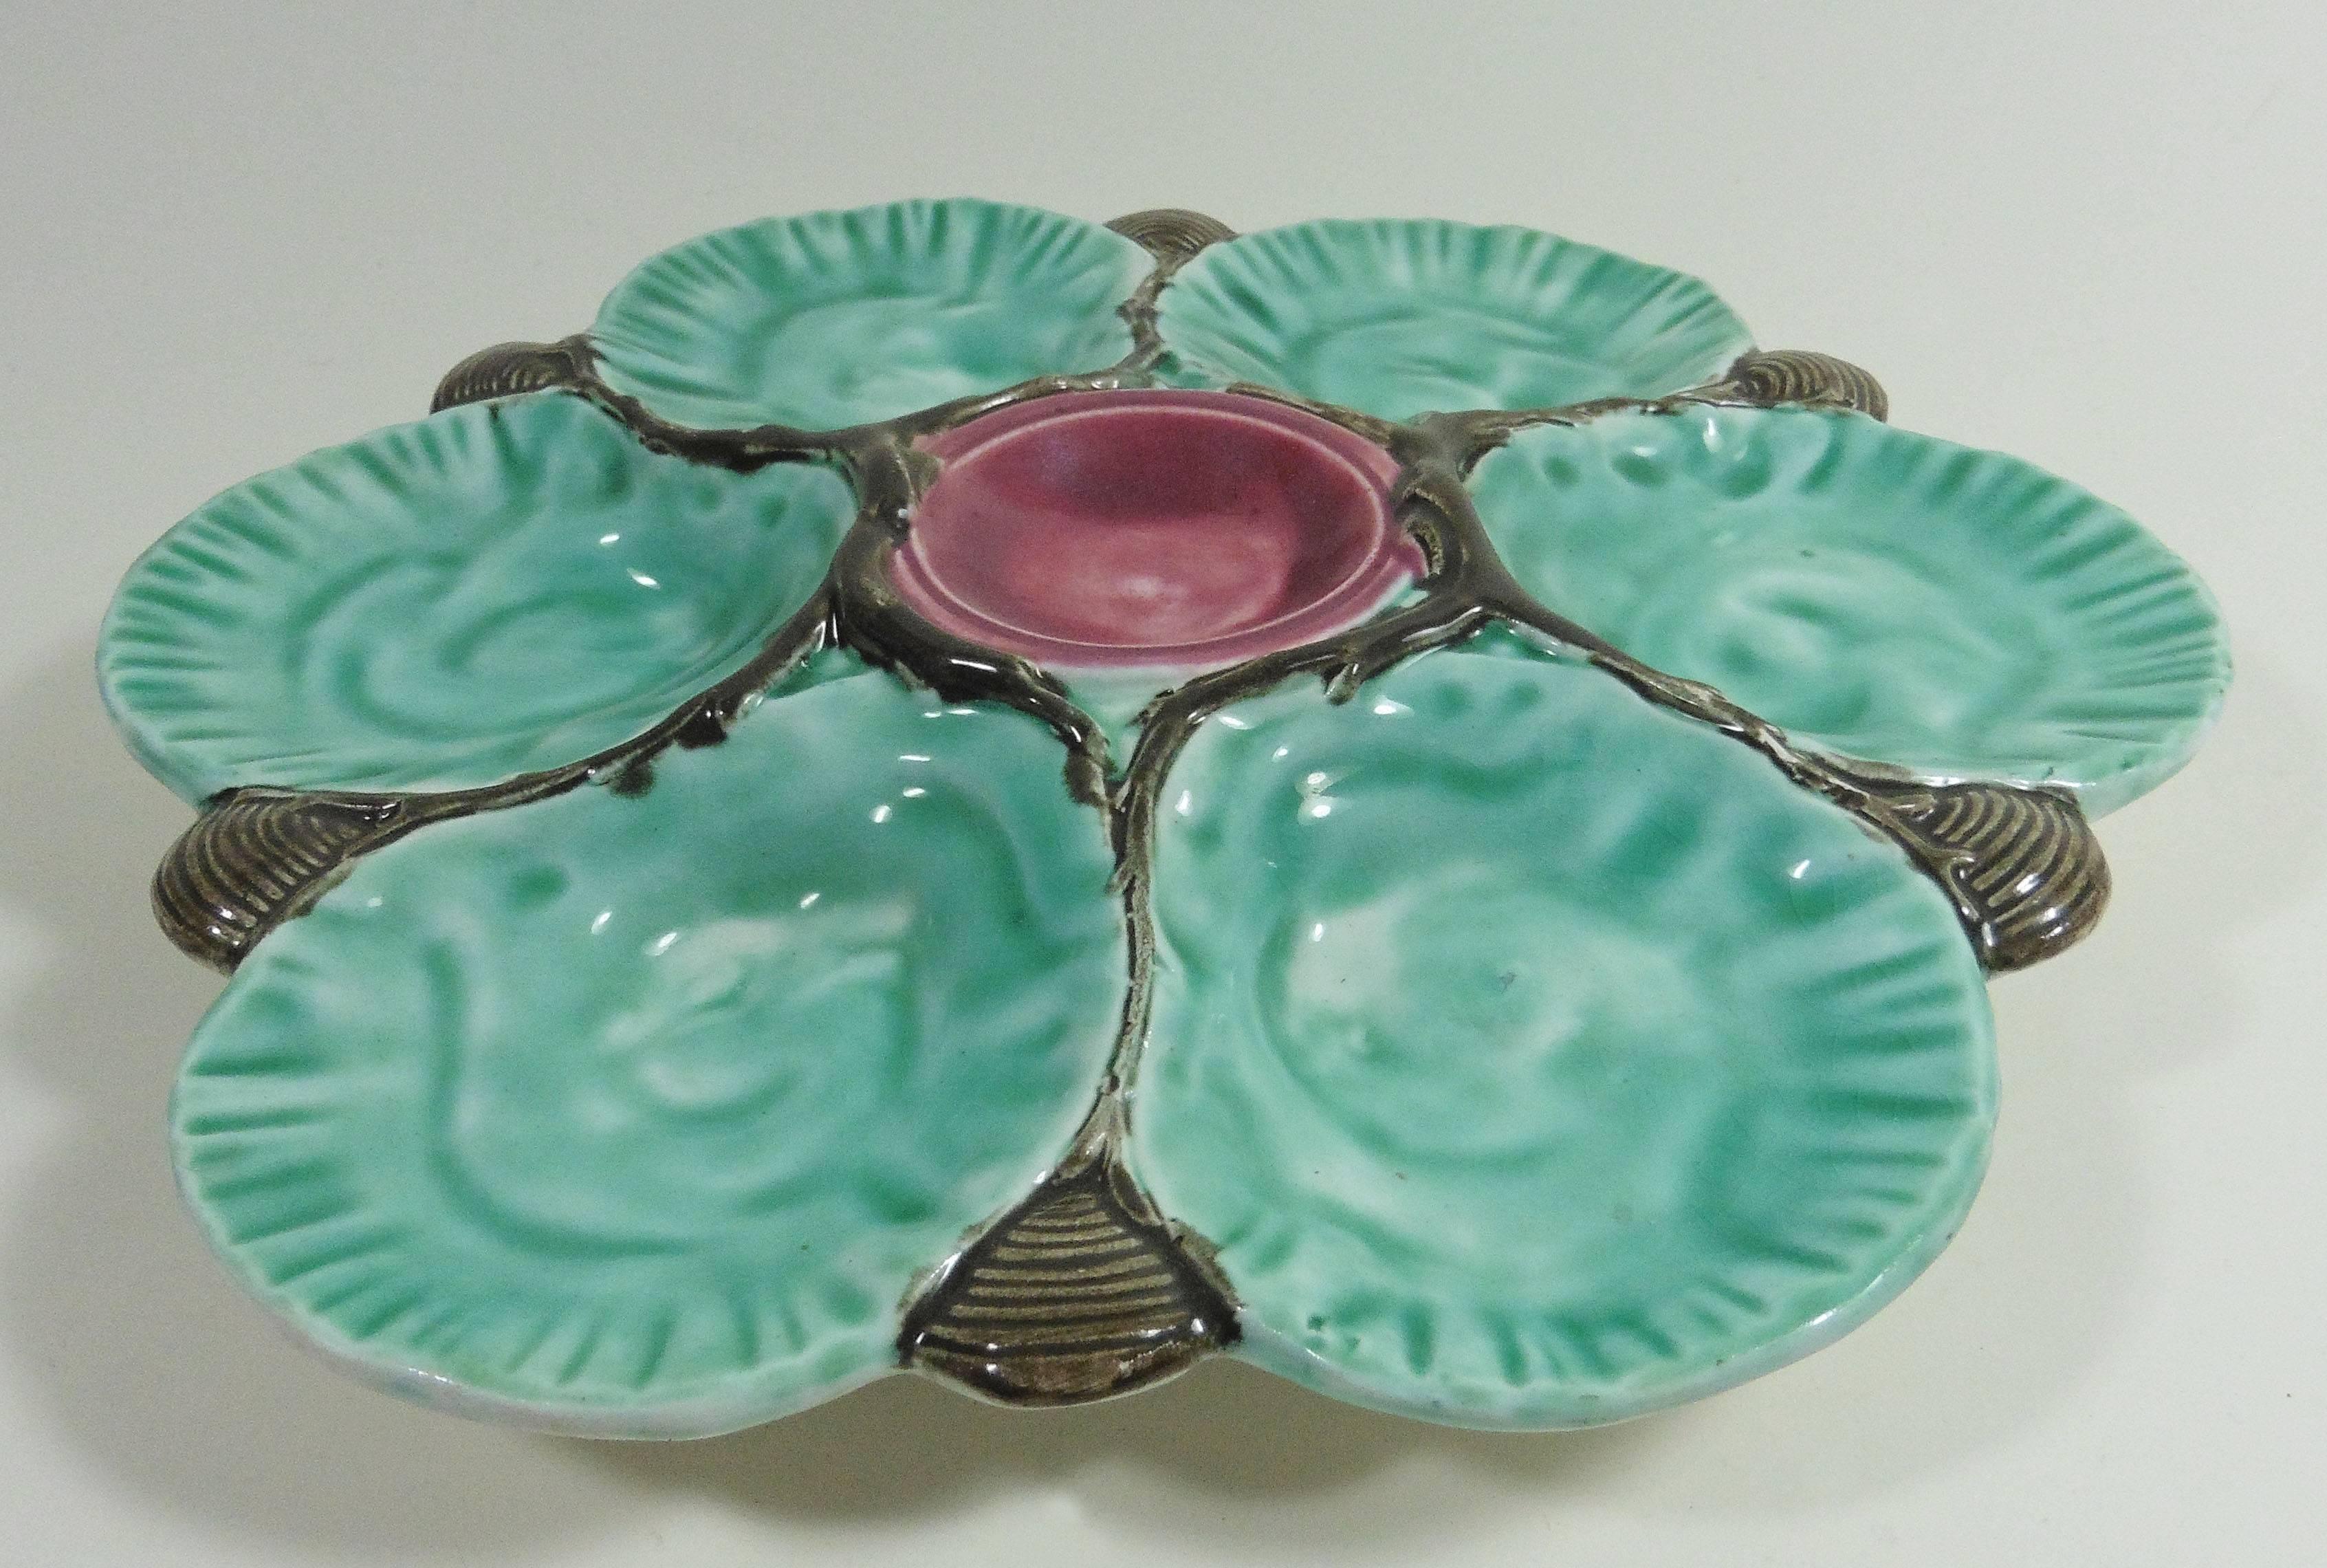 Colorful and rare Majolica oyster plate Choisy Le roi unsigned circa 1890.
The six wells are aqua turquoise between grey shells and the center is red pink.
.